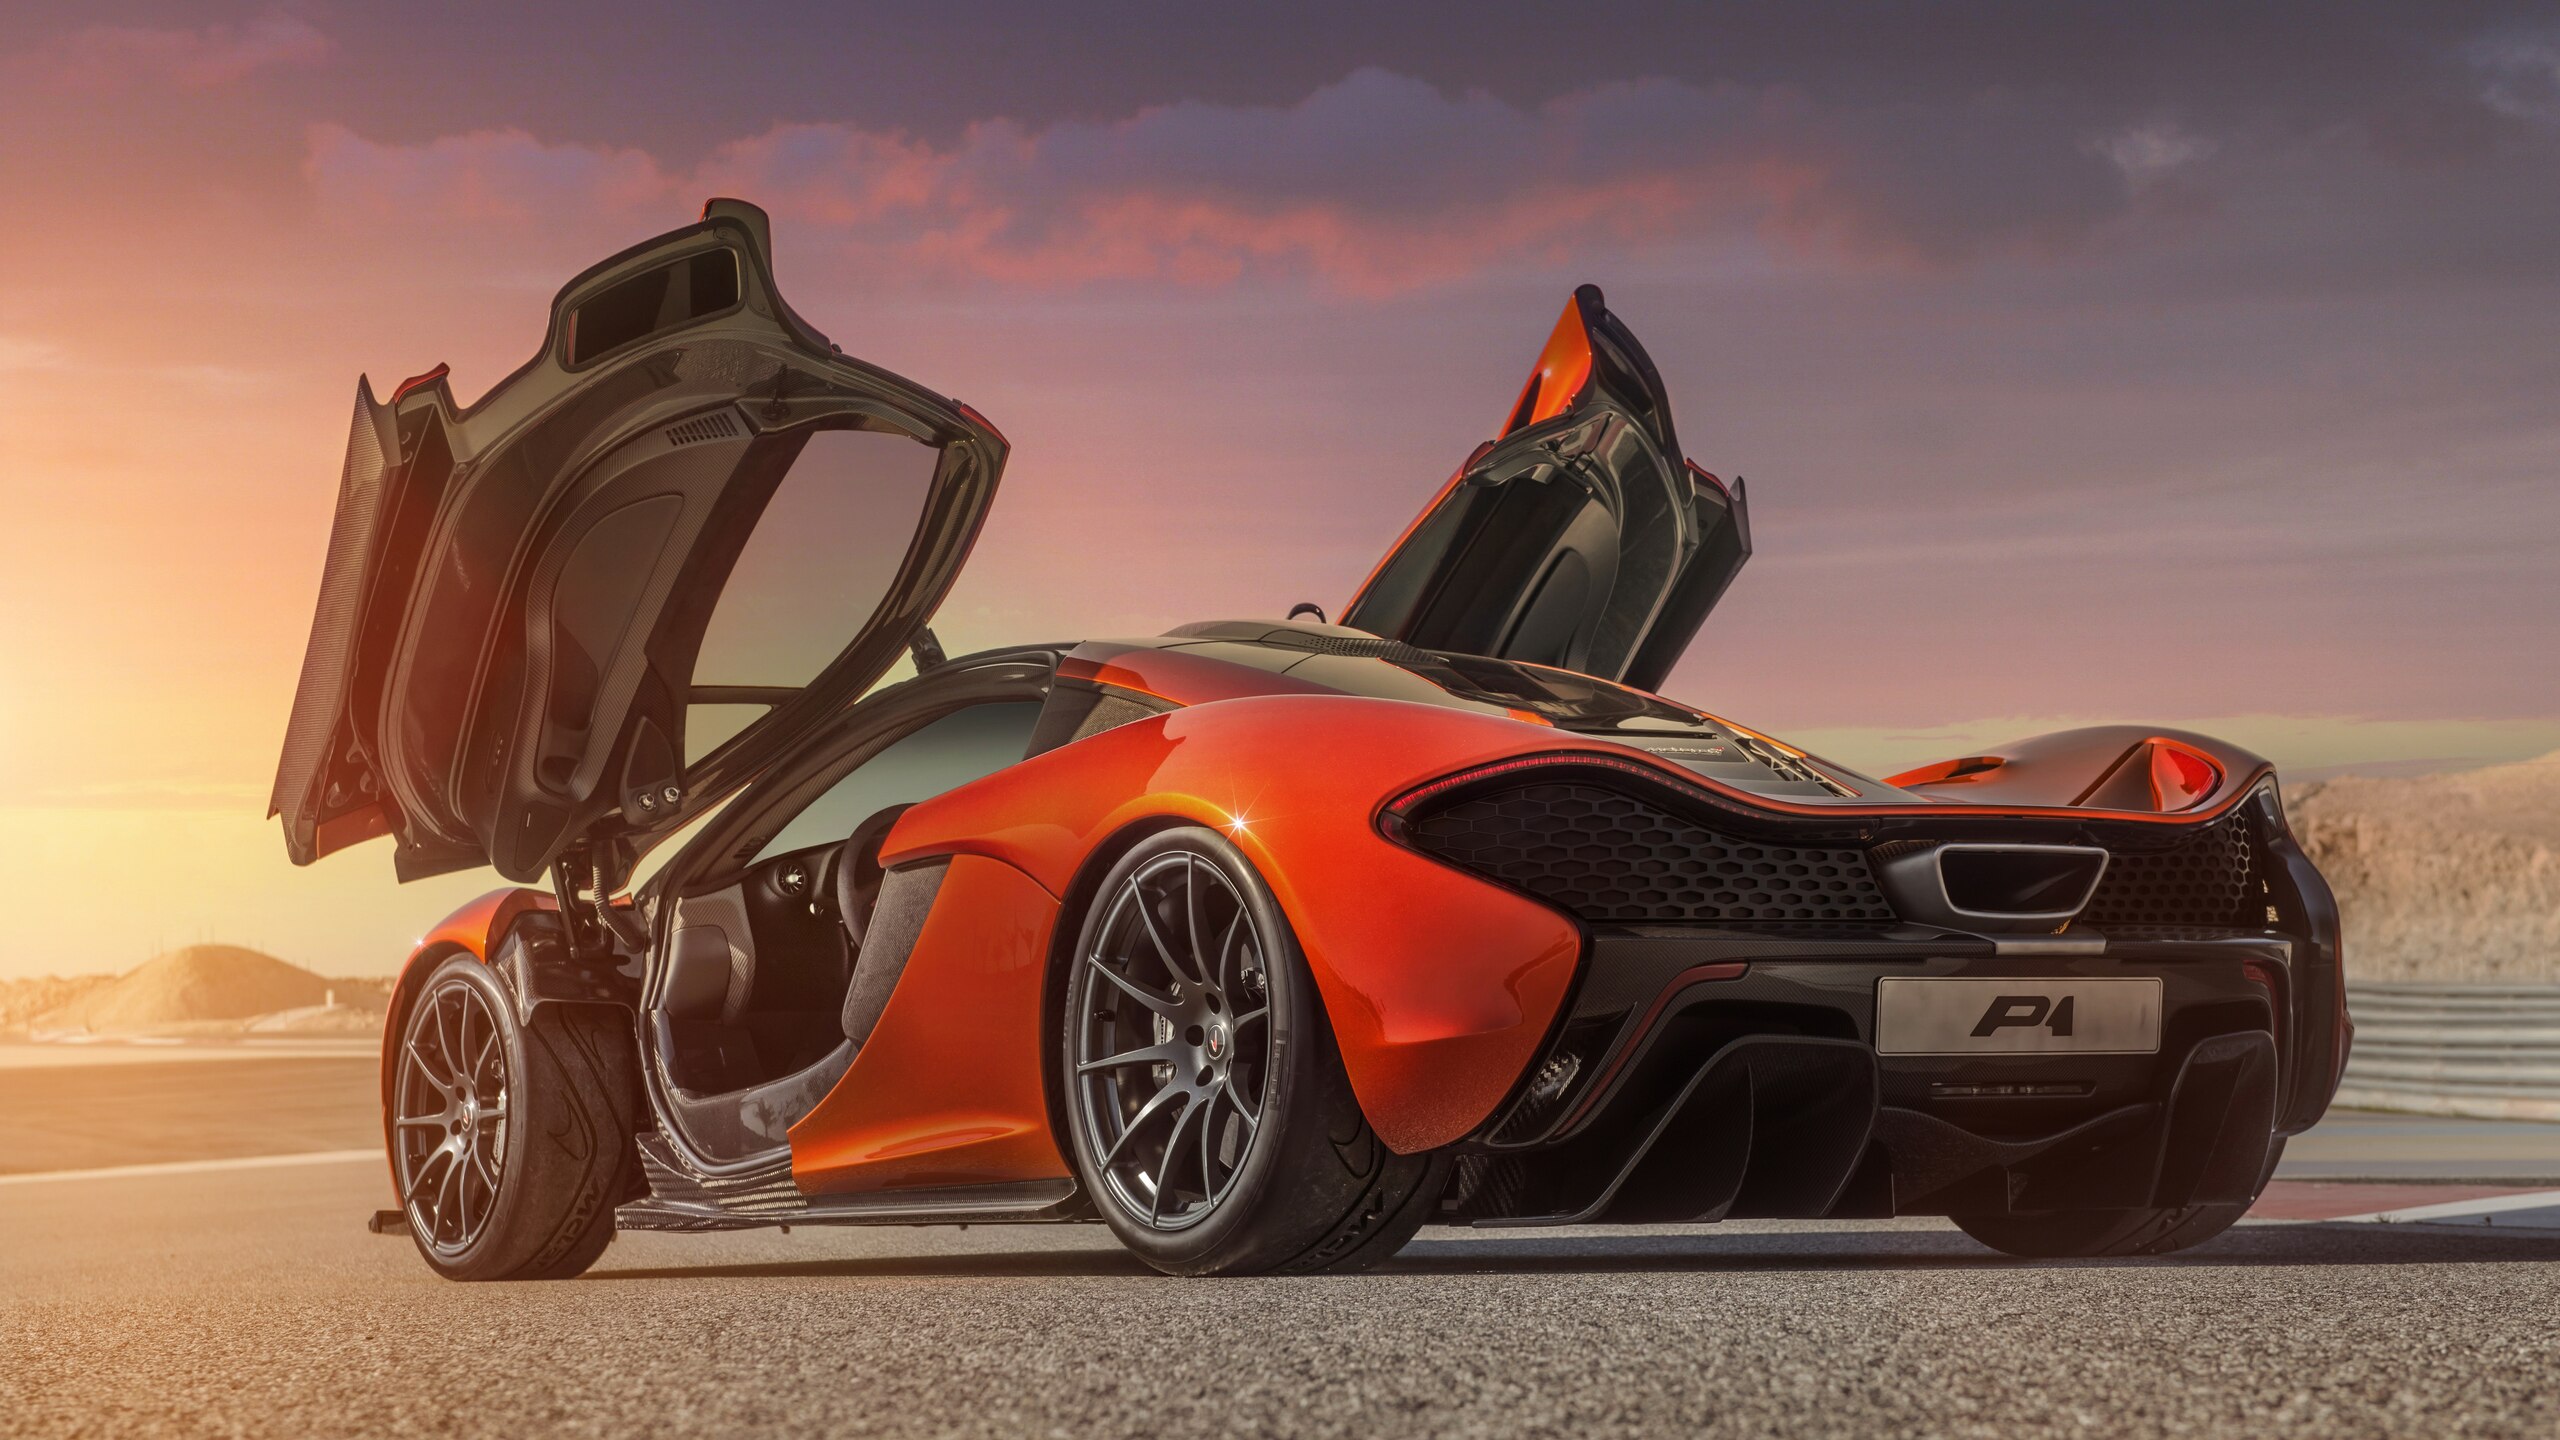 2560x1440 Mclaren P1 8k 1440p Resolution Hd 4k Wallpapers Images Backgrounds Photos And Pictures